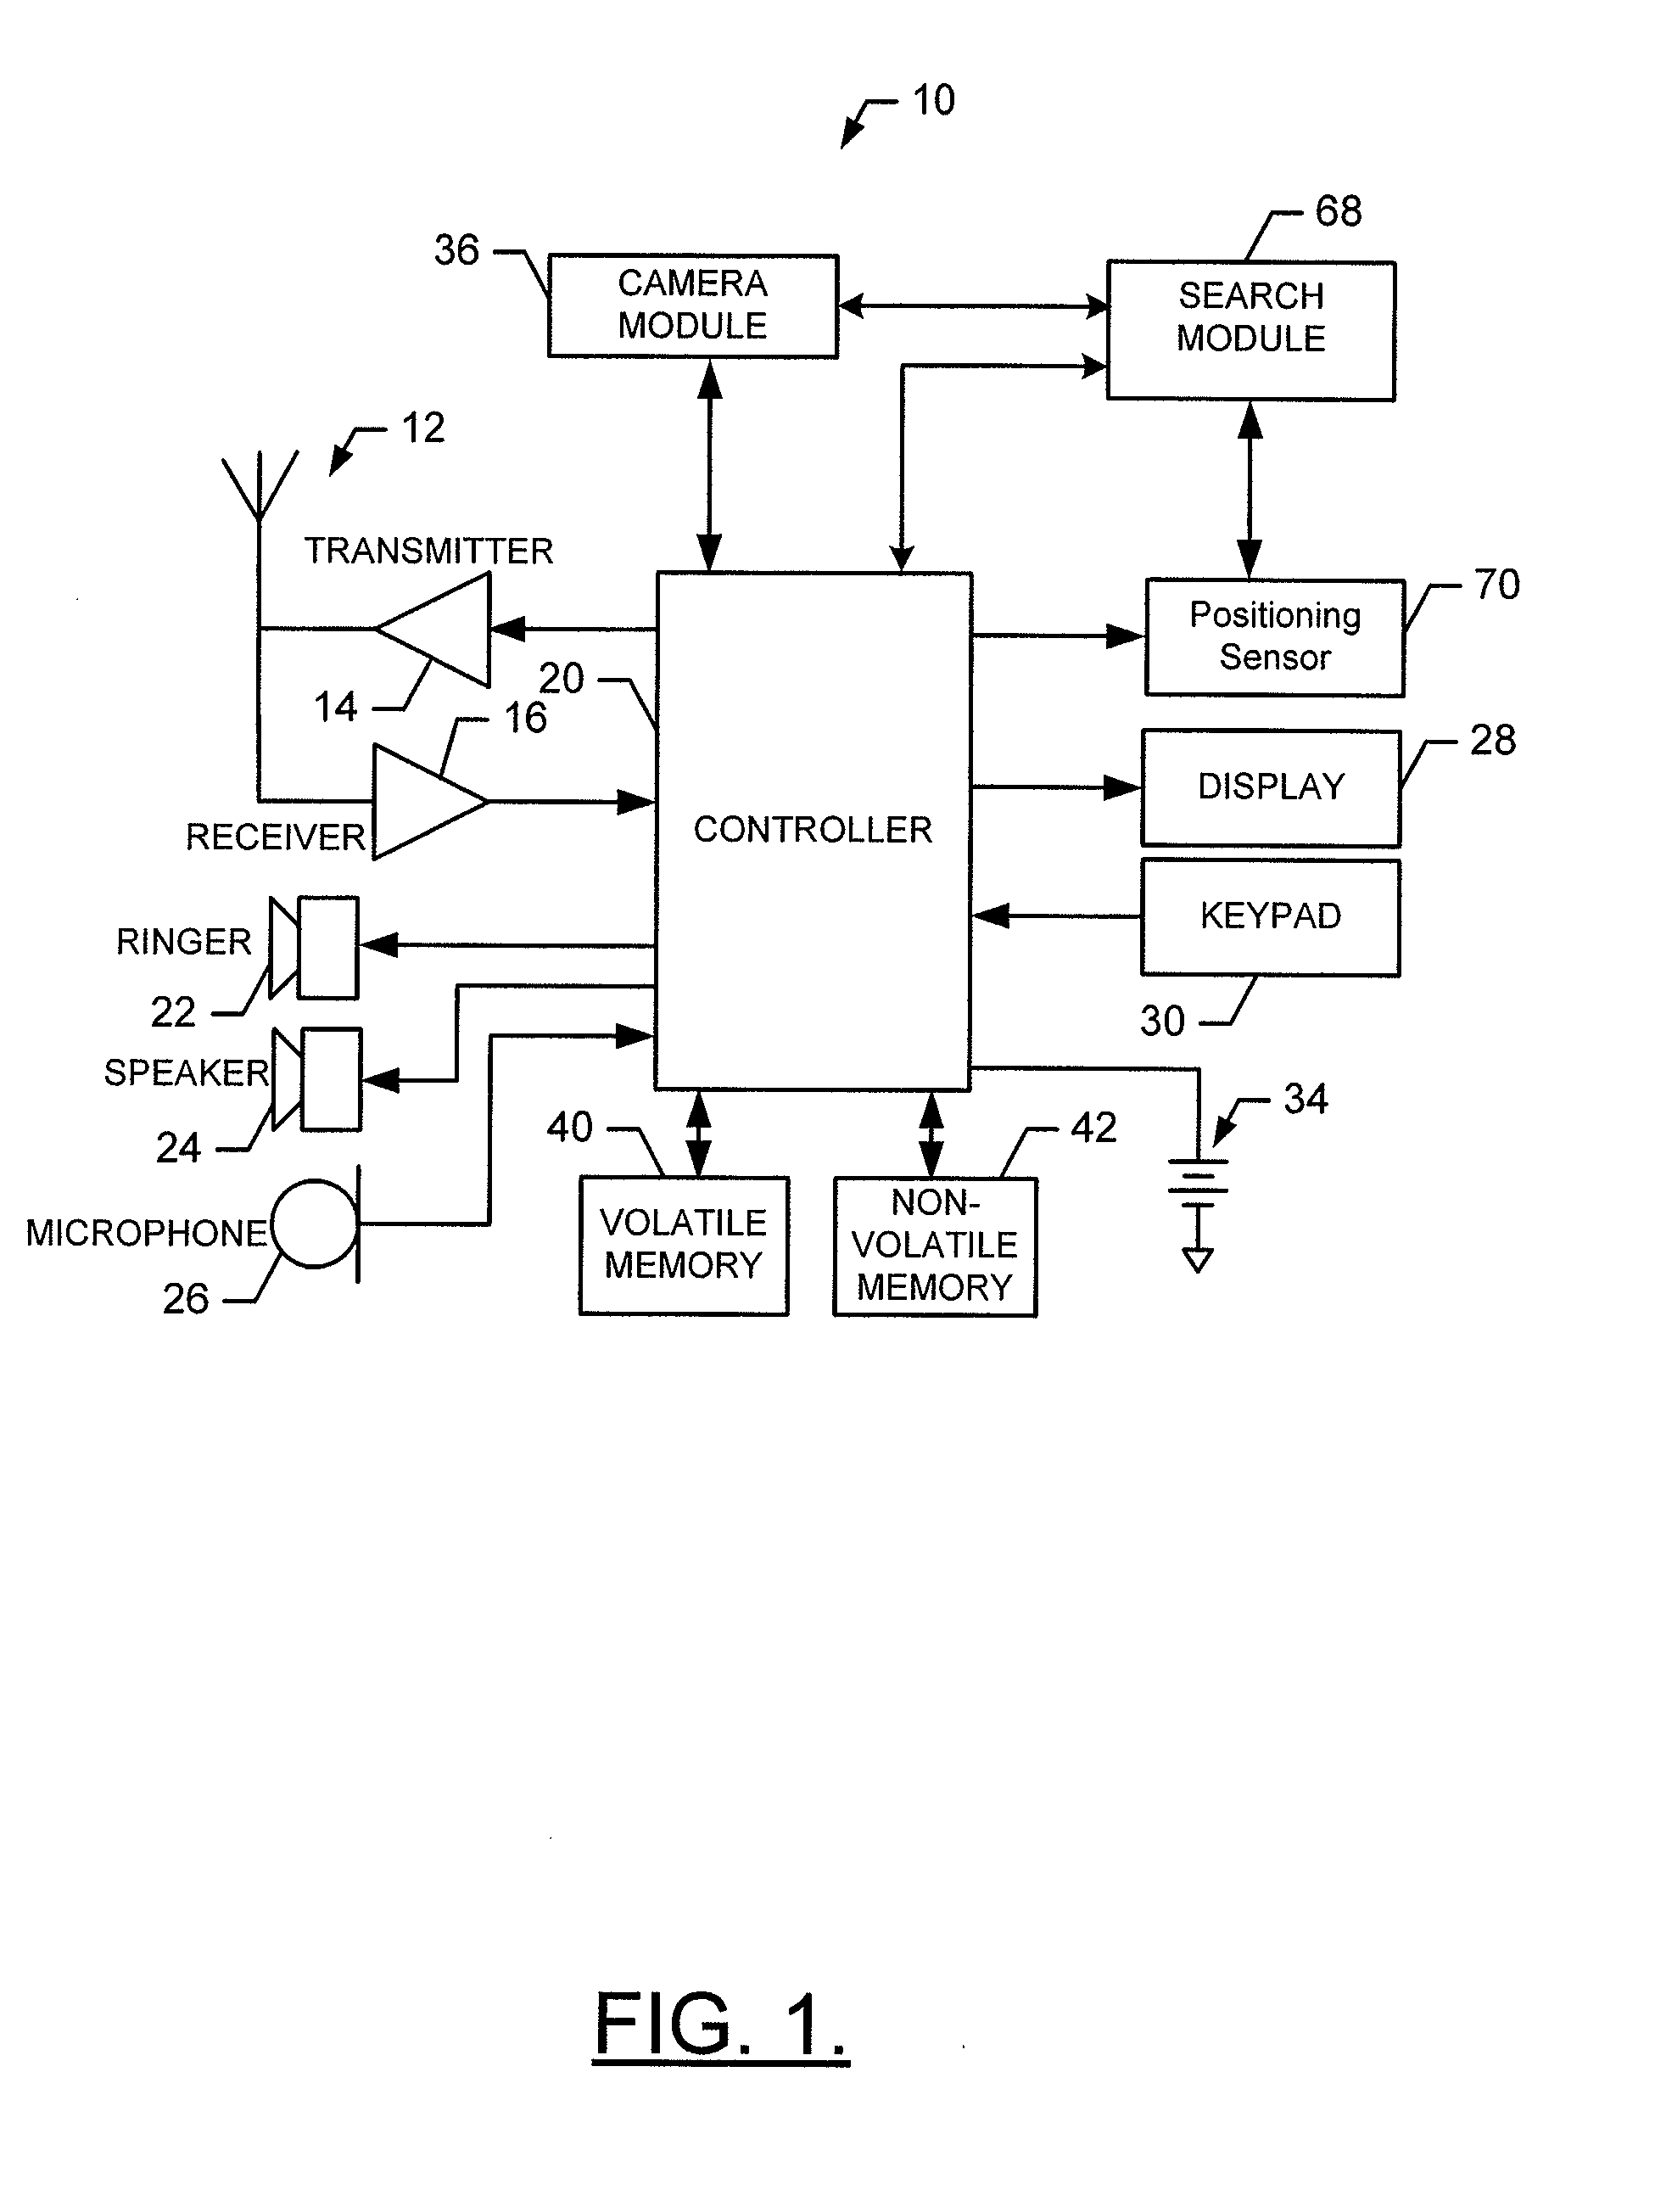 Method, apparatus and computer program product for multiple buffering for search application